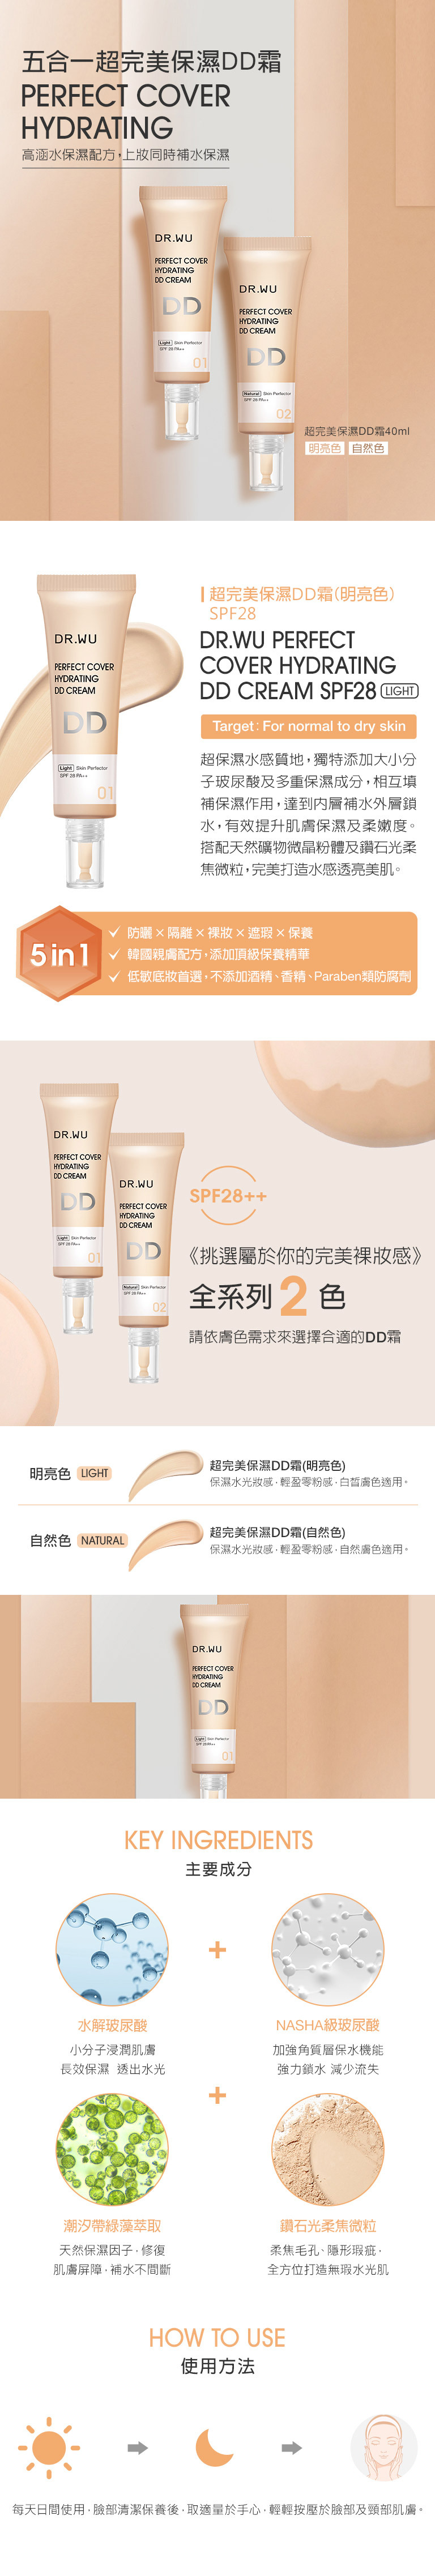 DR.WU - The Perfect All-in-one DD cream is now available! The NEW Perfect  Cover Hydrating DD Cream comes with New LOOK! New FORMULA and New FEATURES!  💕 🔸️Hydrating and nourishing 🔸️ Basic